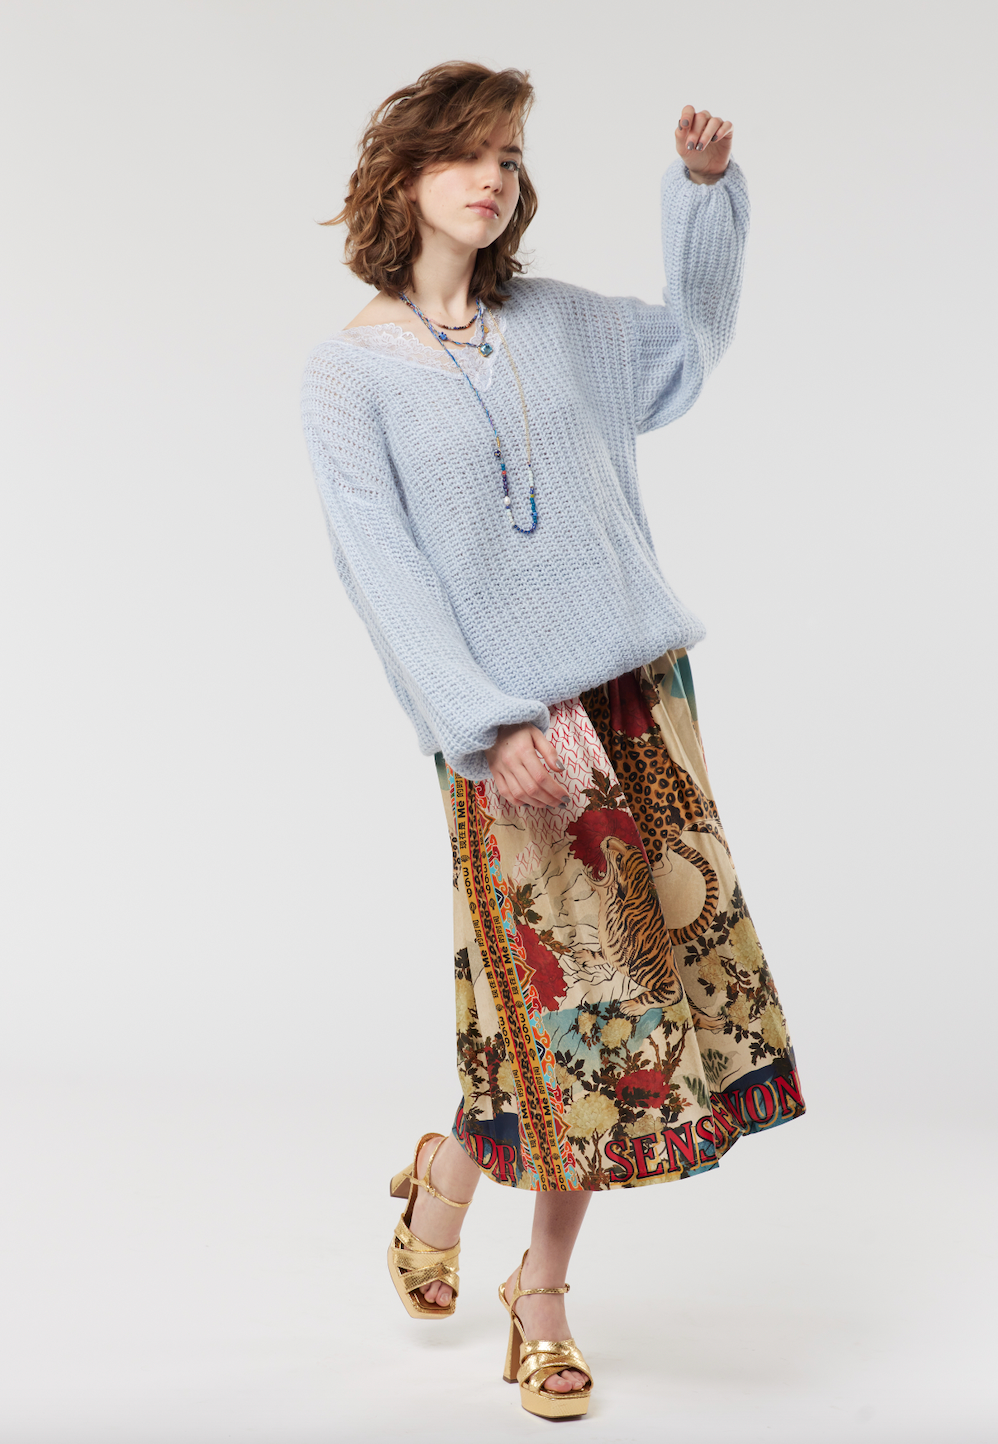 Pull on skirt with elasticated waist tiger and oriental flower imagery with Sense of Wonder wording at the bottom